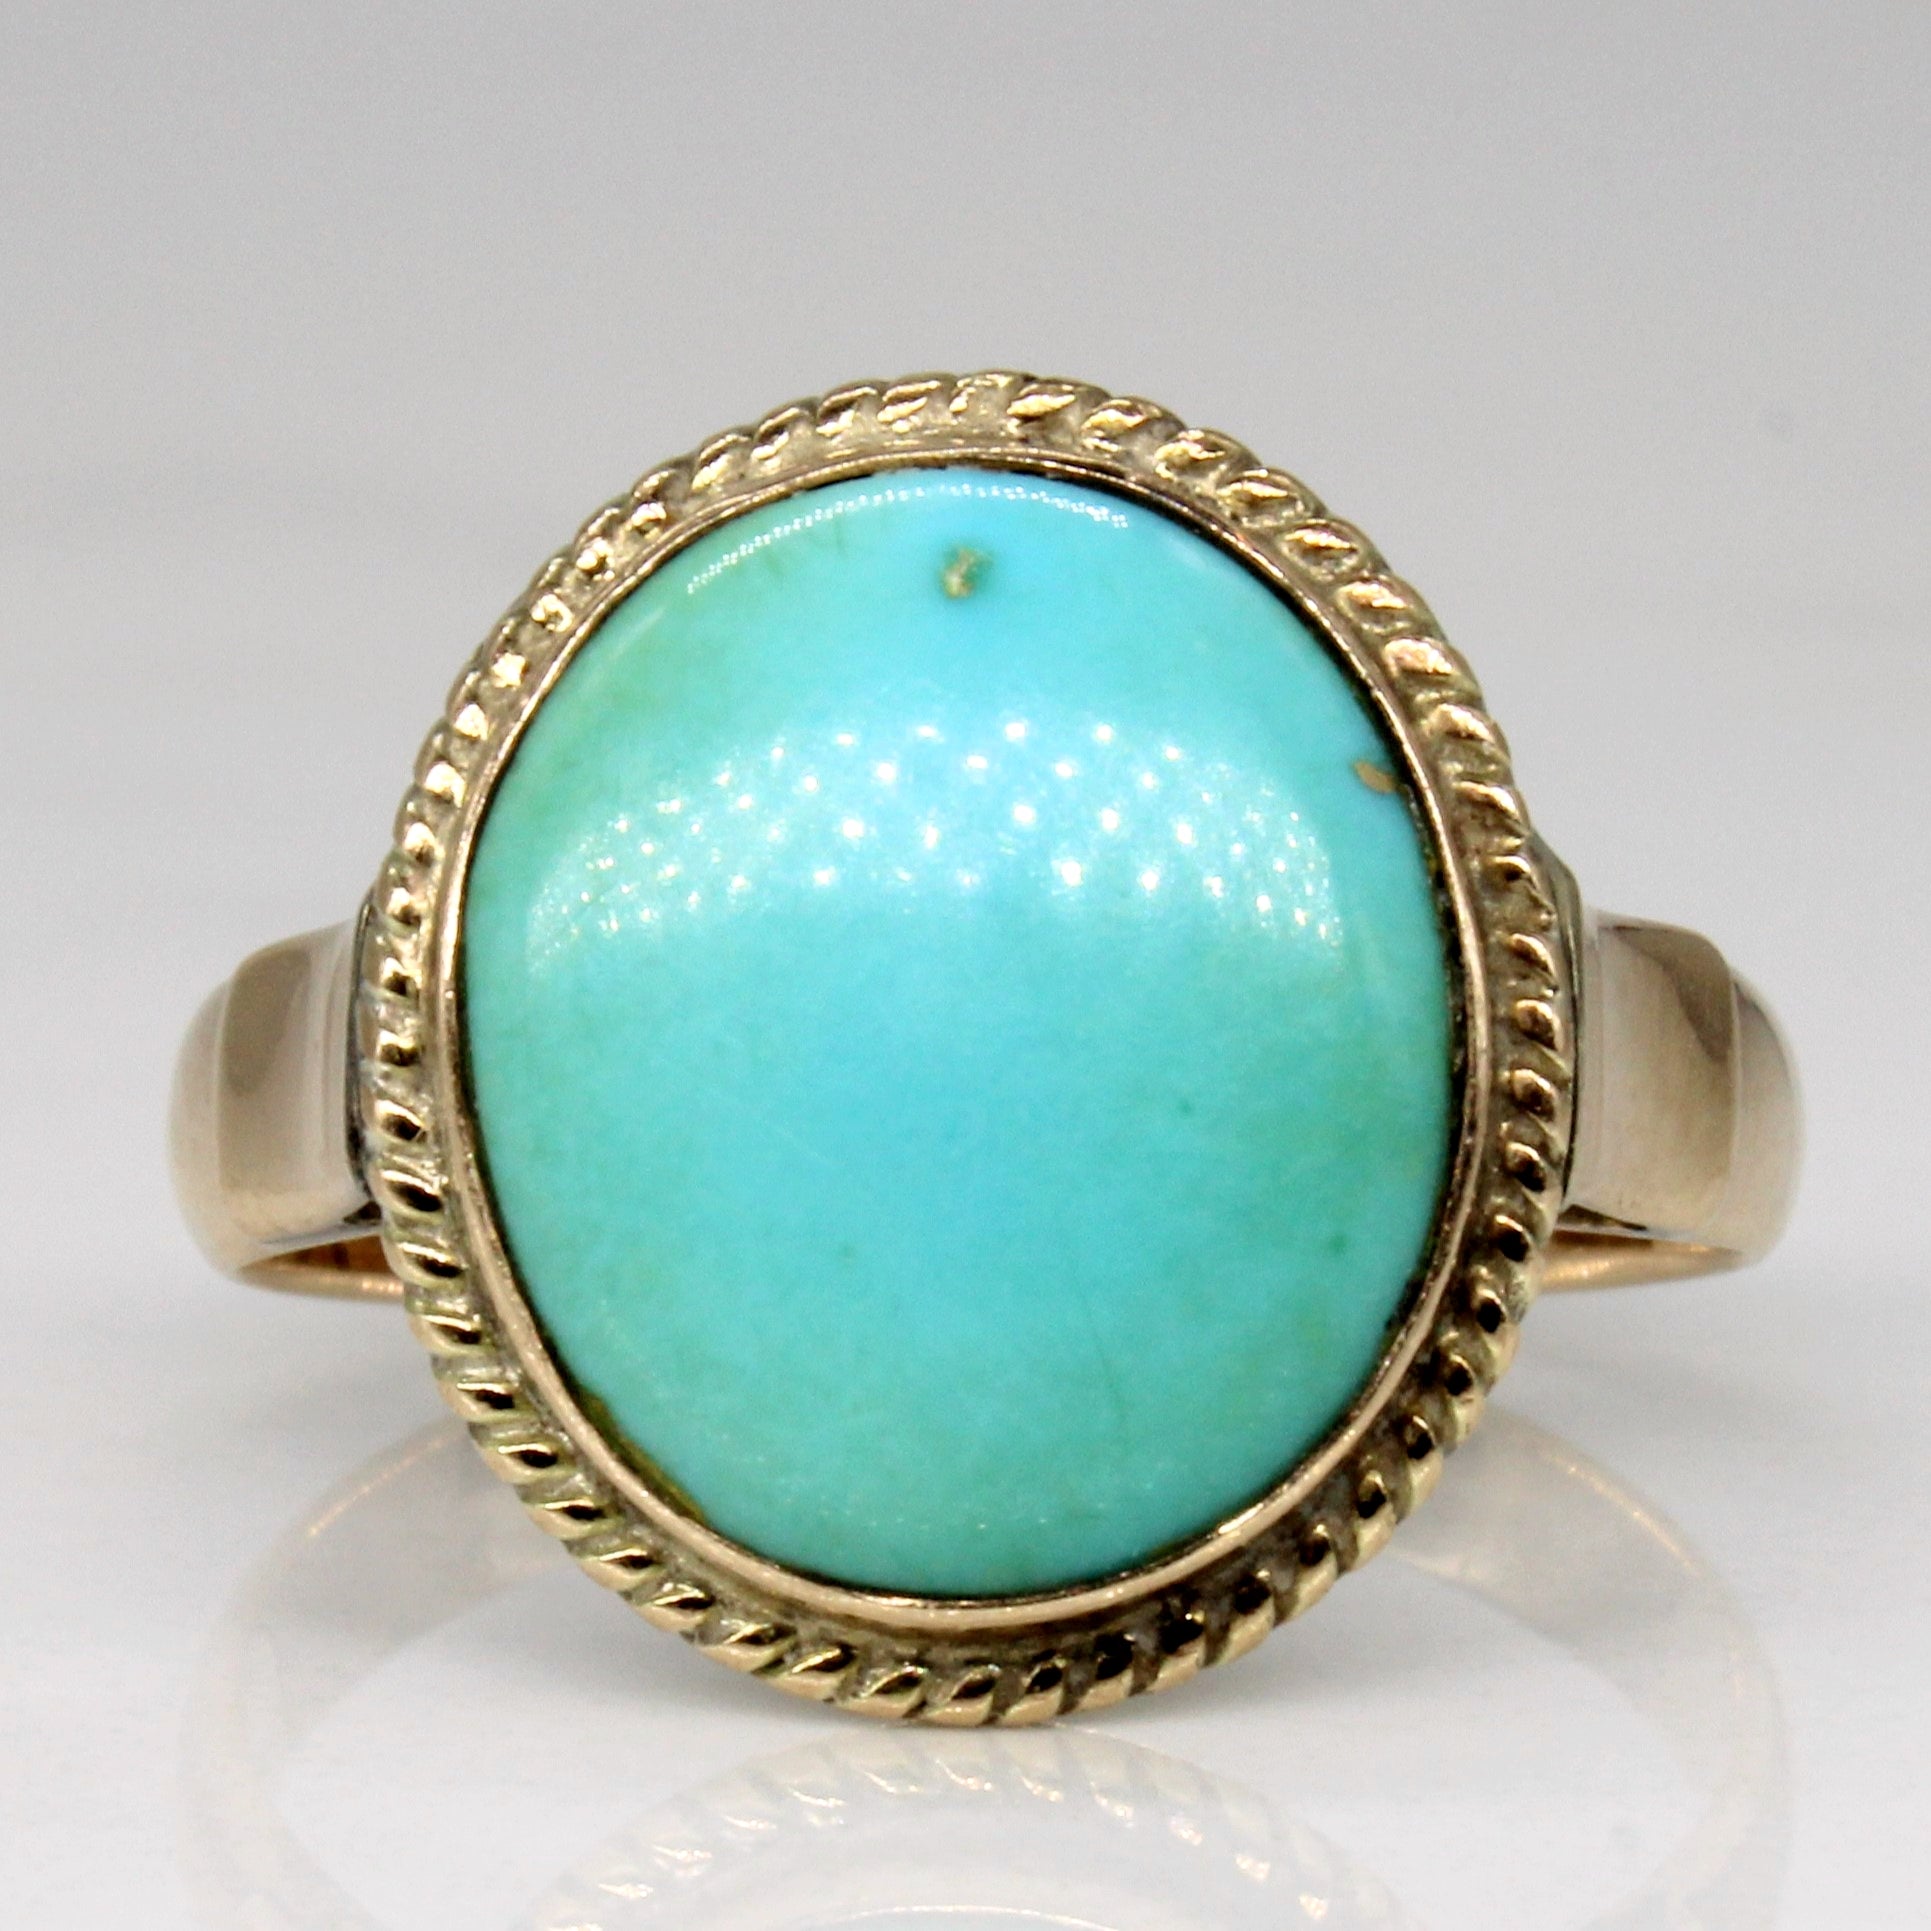 Turquoise Cocktail Ring | 3.15ct | SZ 7.25 |